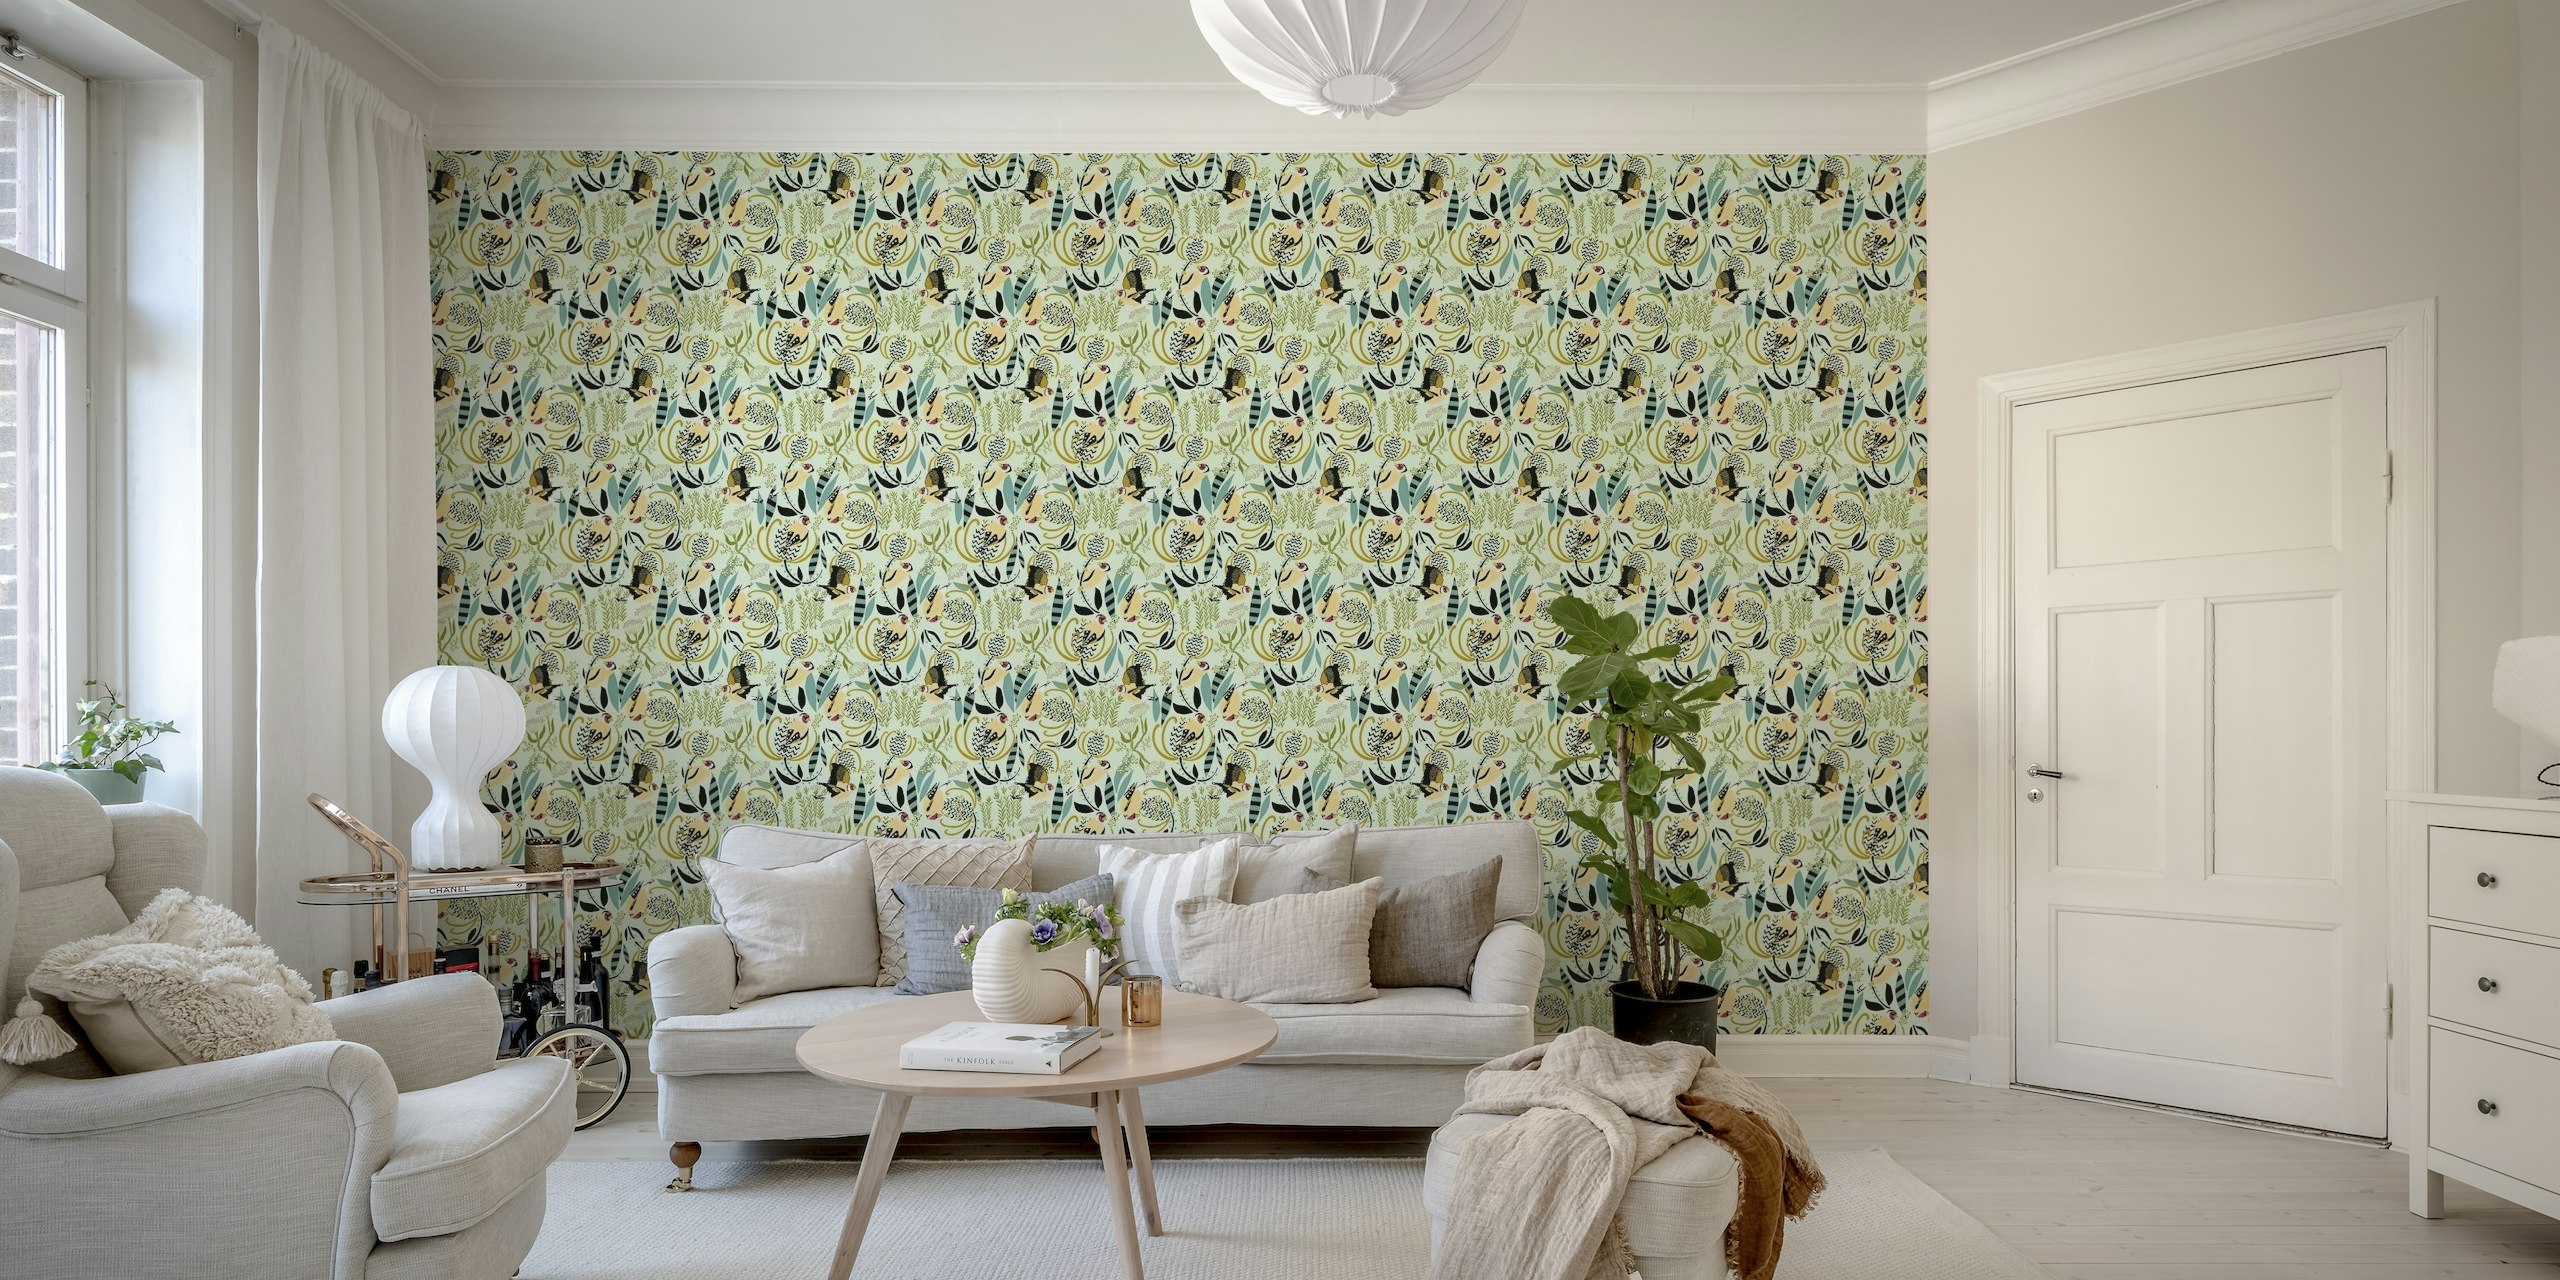 Meadow birds and thistle wall mural with goldfinches